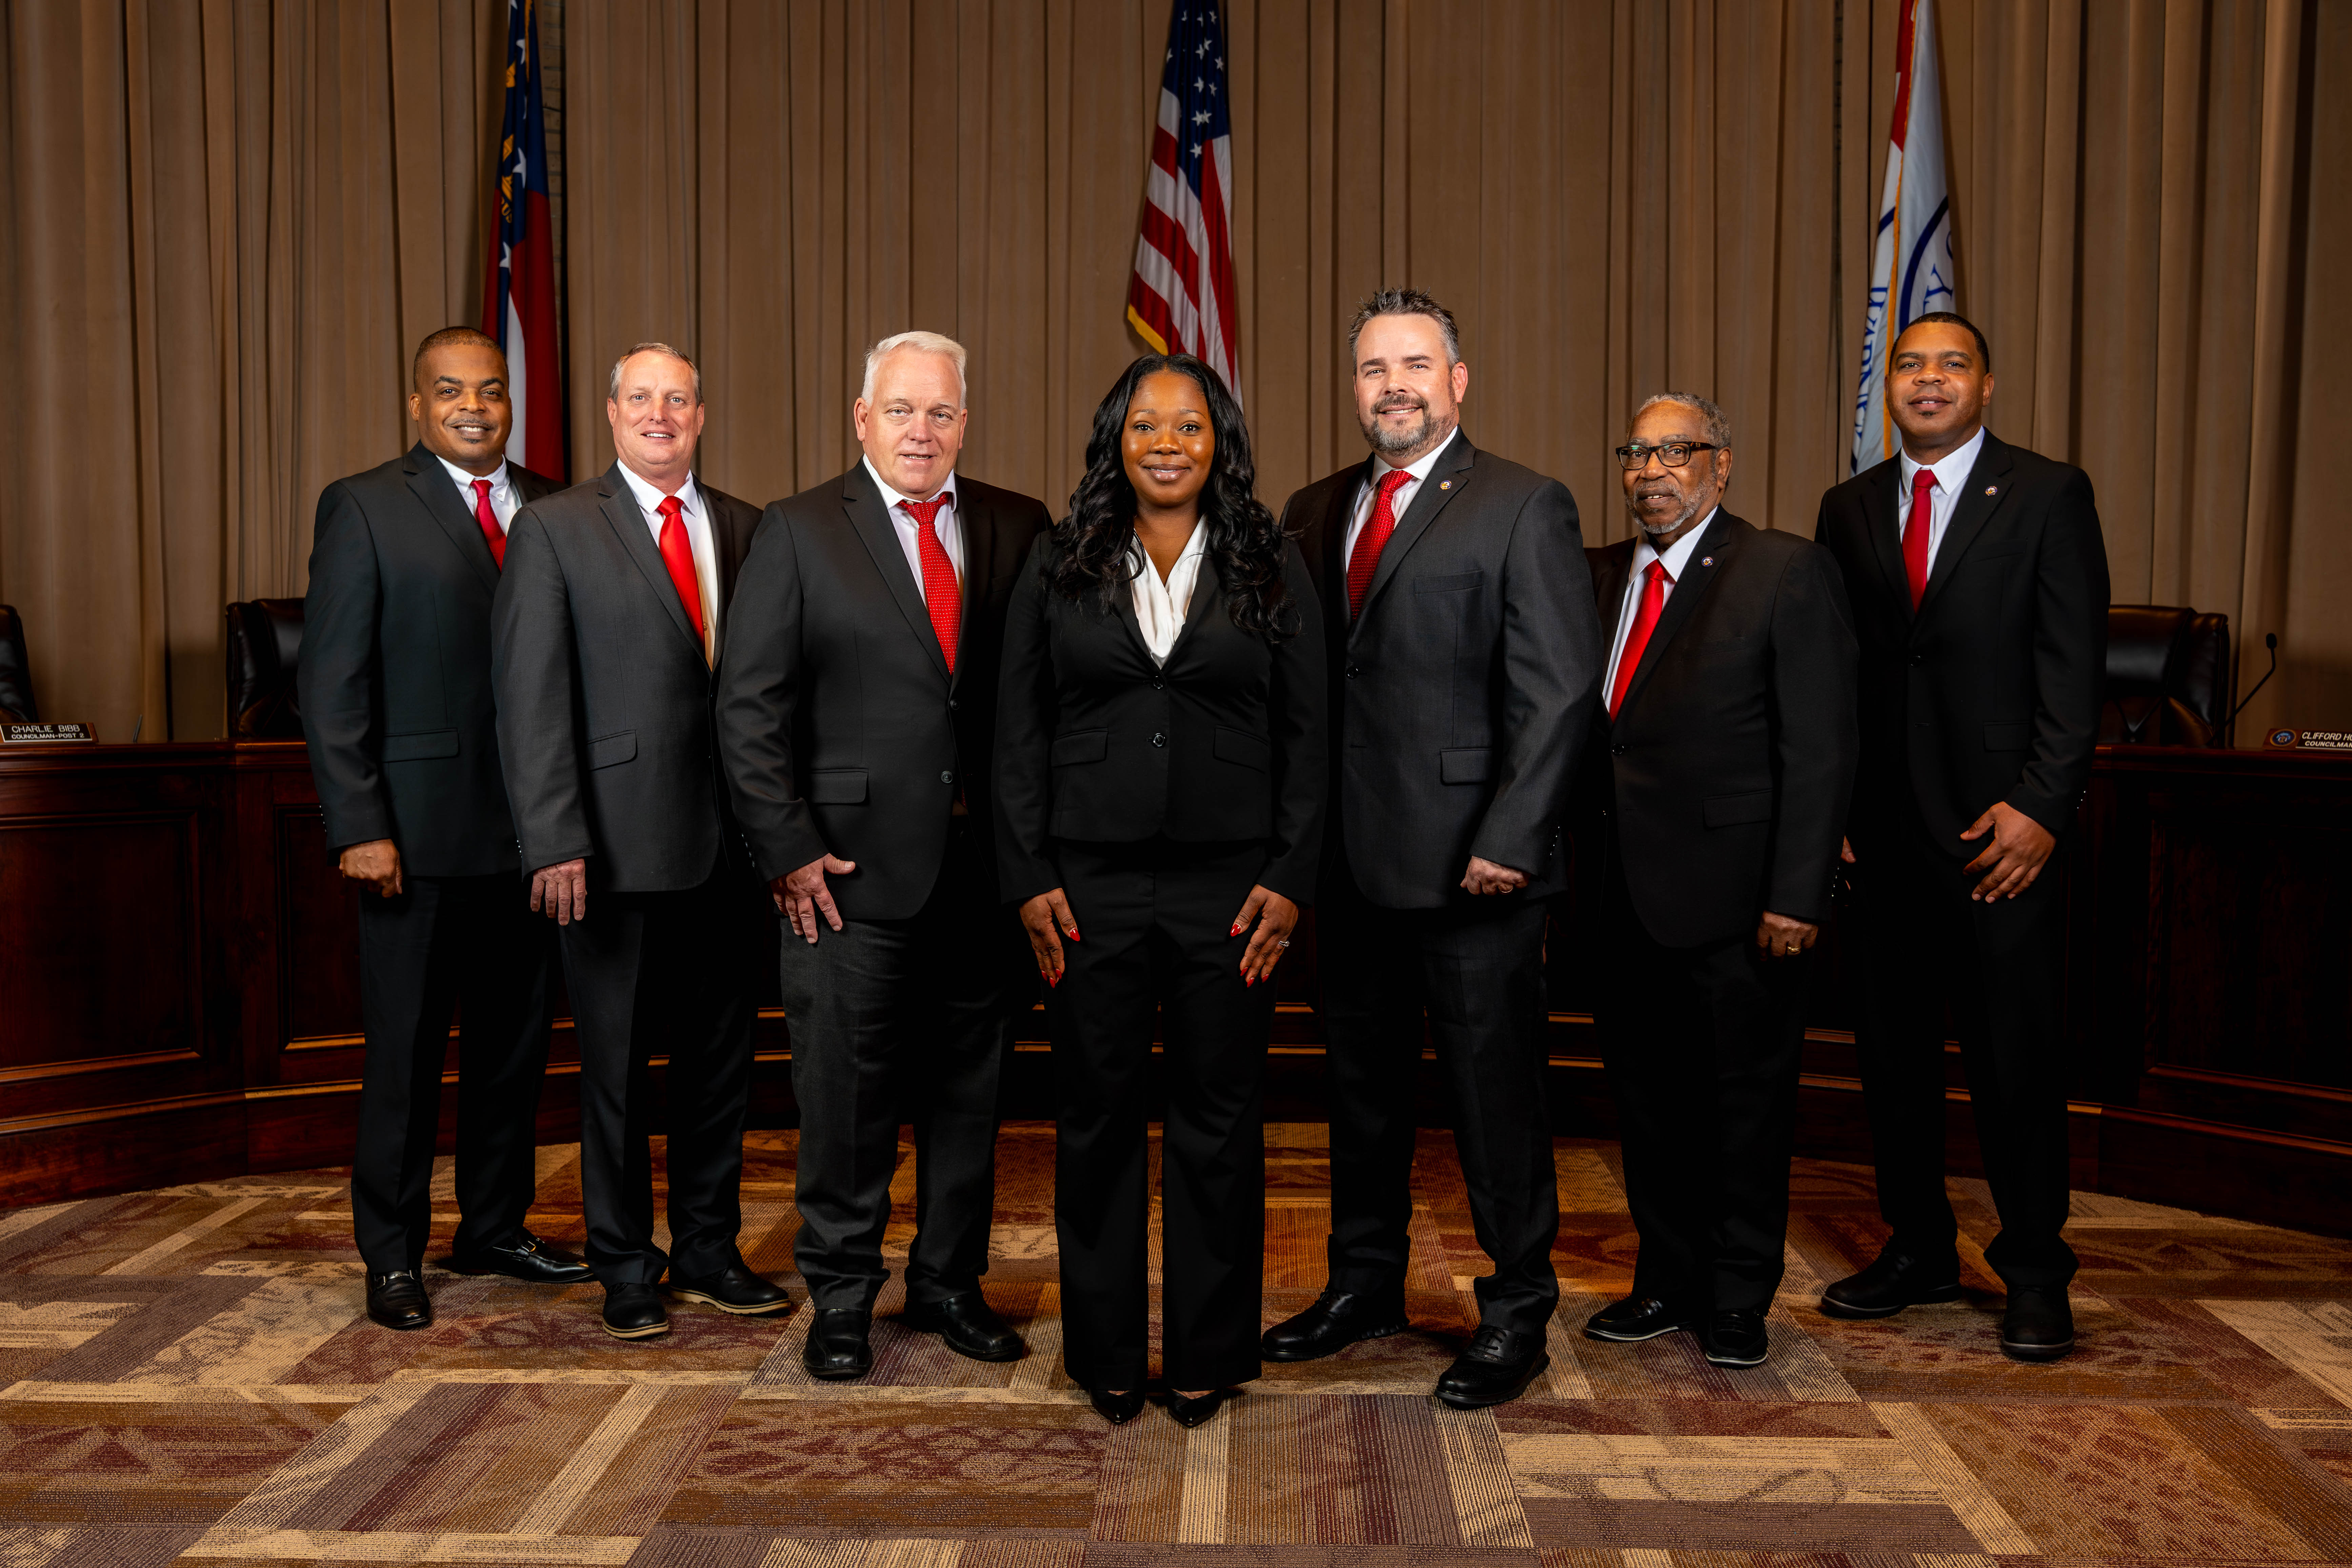 Mayor and members of the Warner Robins City Council